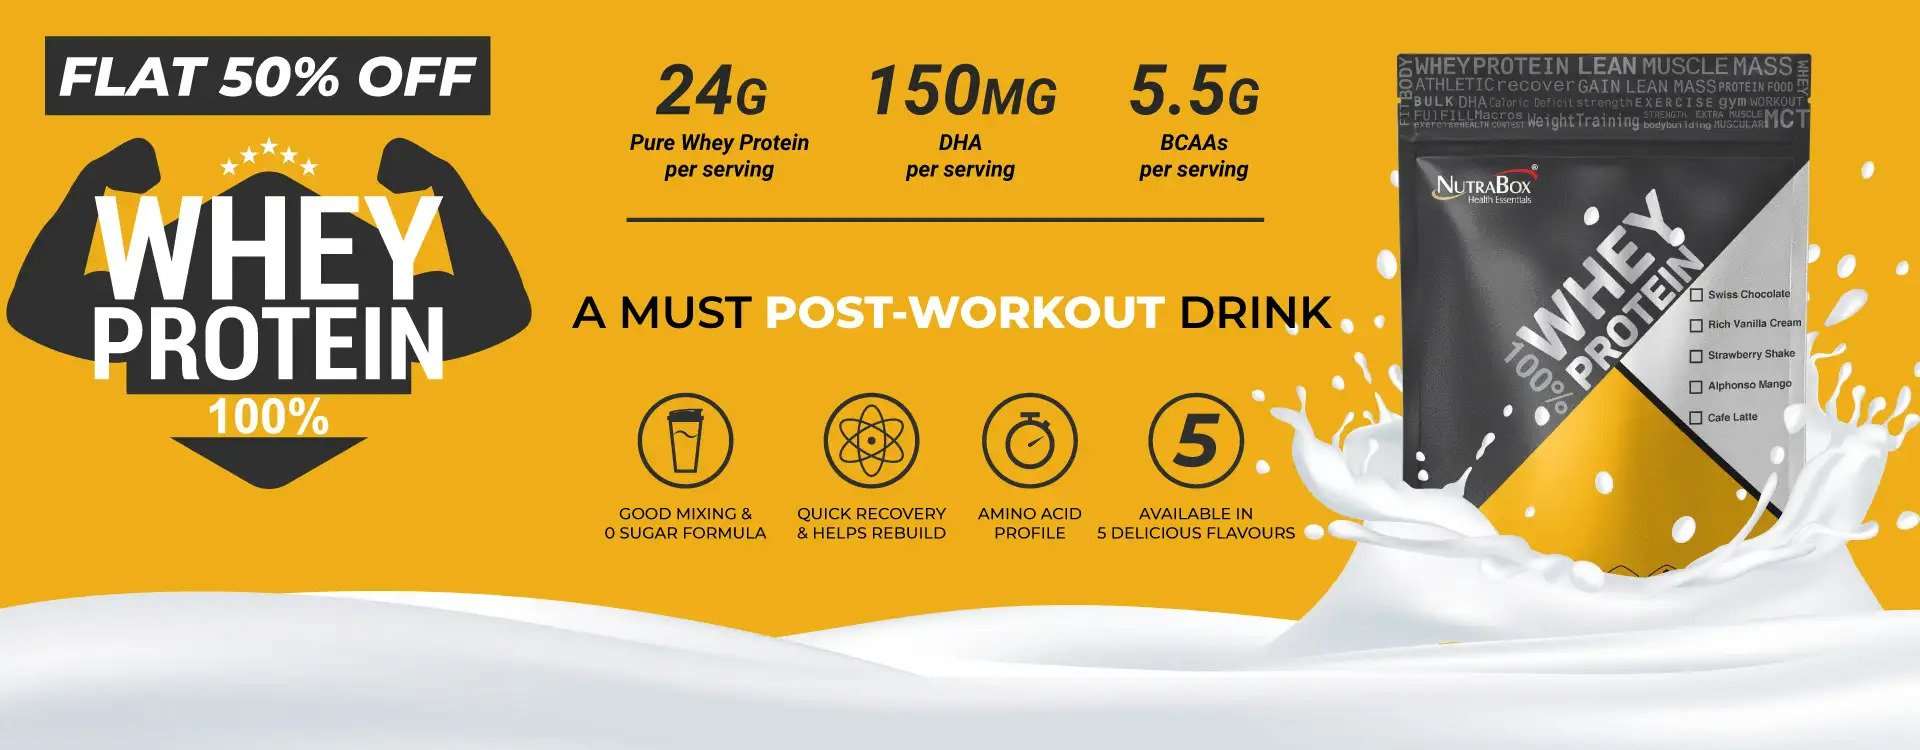 monster labs Monster Whey Protein Bag 4.4 LBS Vanilla Flavor Whey Protein  Price in India - Buy monster labs Monster Whey Protein Bag 4.4 LBS Vanilla  Flavor Whey Protein online at Flipkart.com